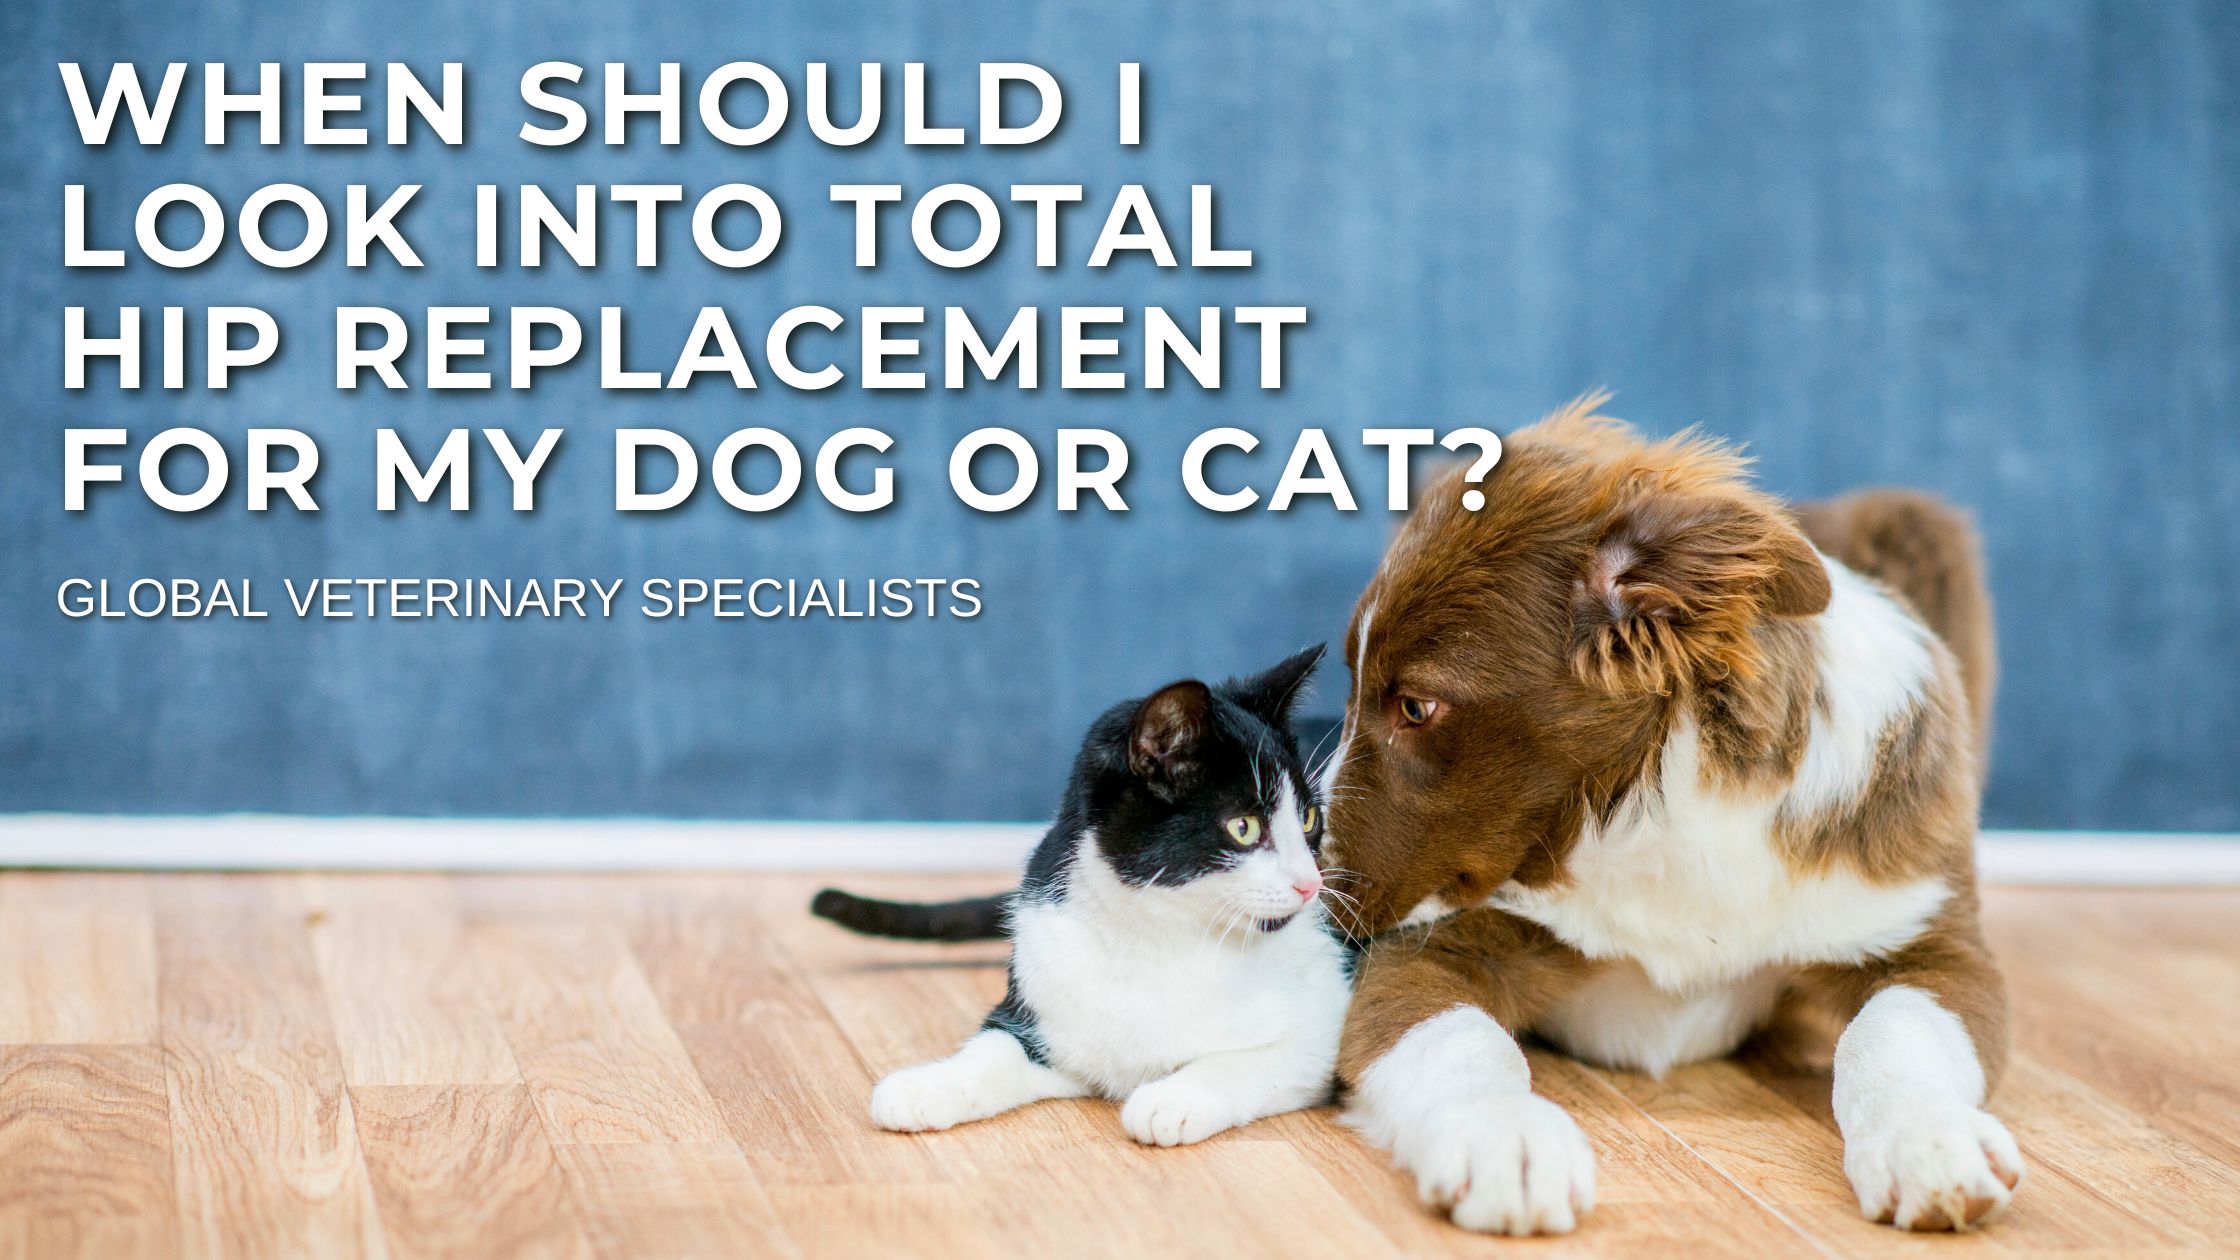 When Should I Look Into Total Hip Replacement For My Dog or Cat